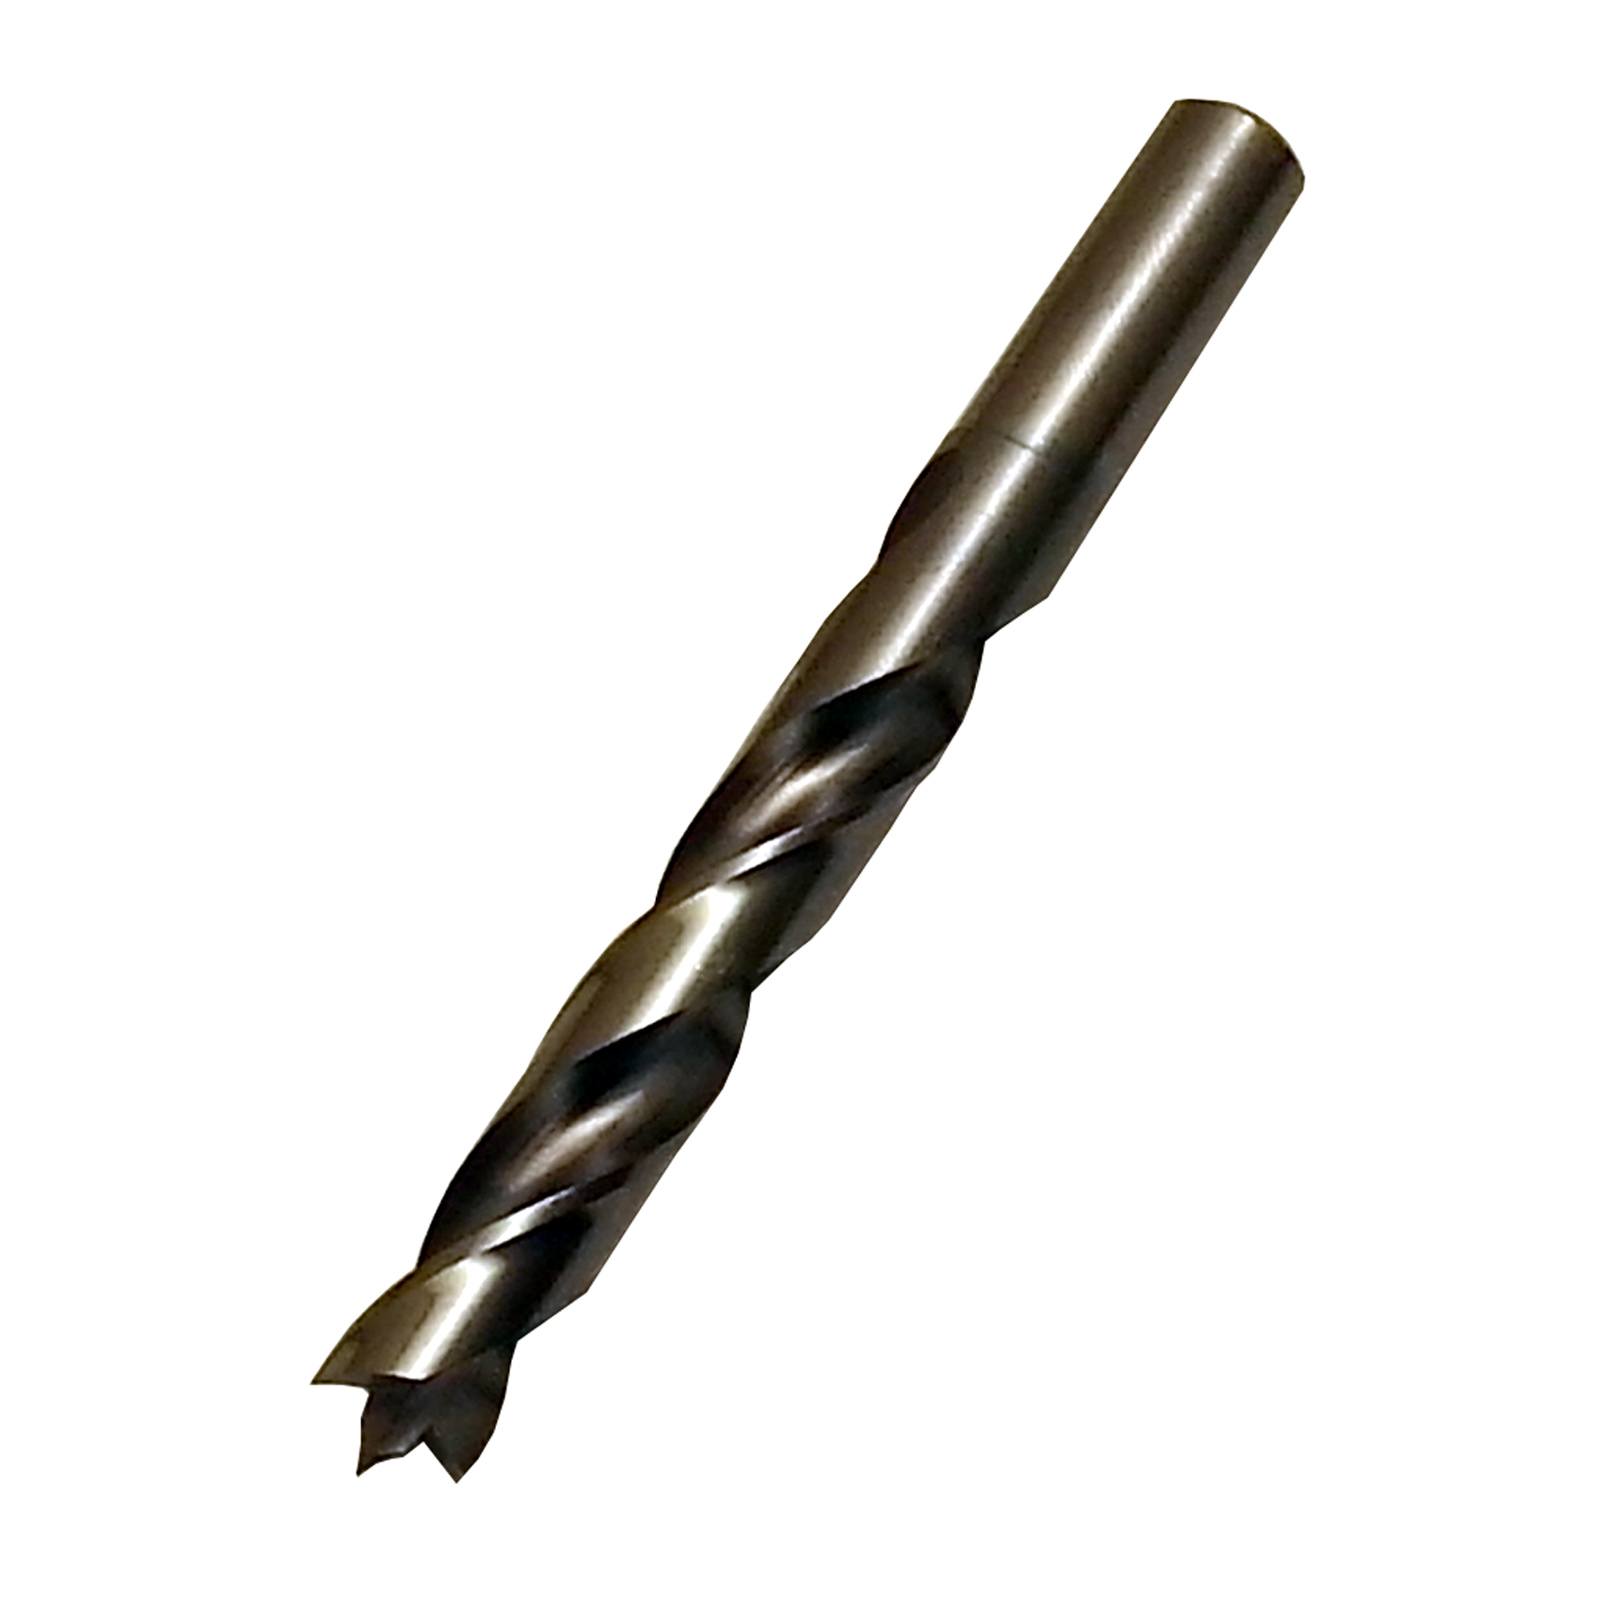 37/64 in. HSS Brad Point Drill Bit for Majestic Pens